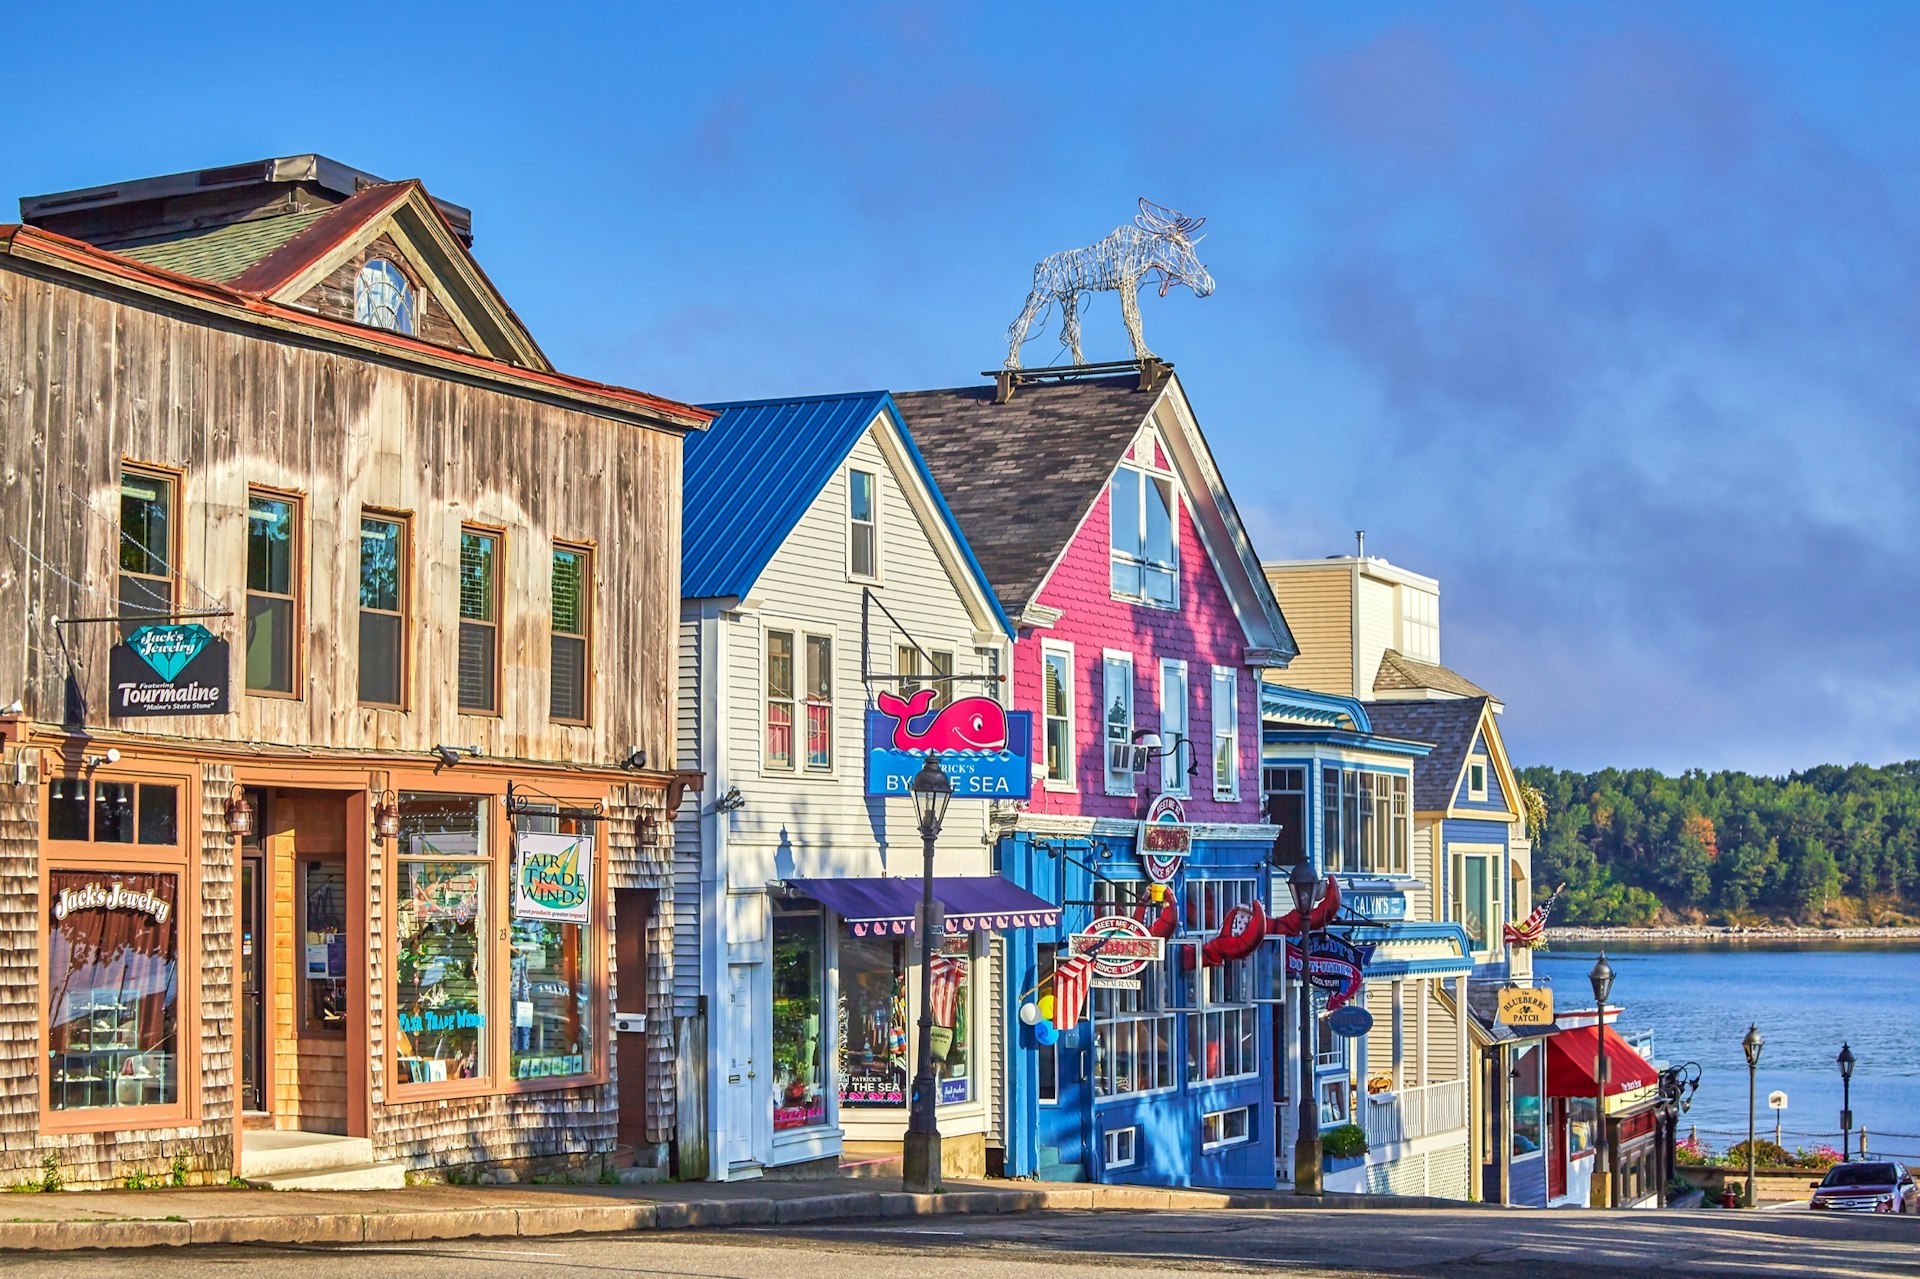 Colorful wooden store fronts with lobster signs in Bar Harbor, Maine